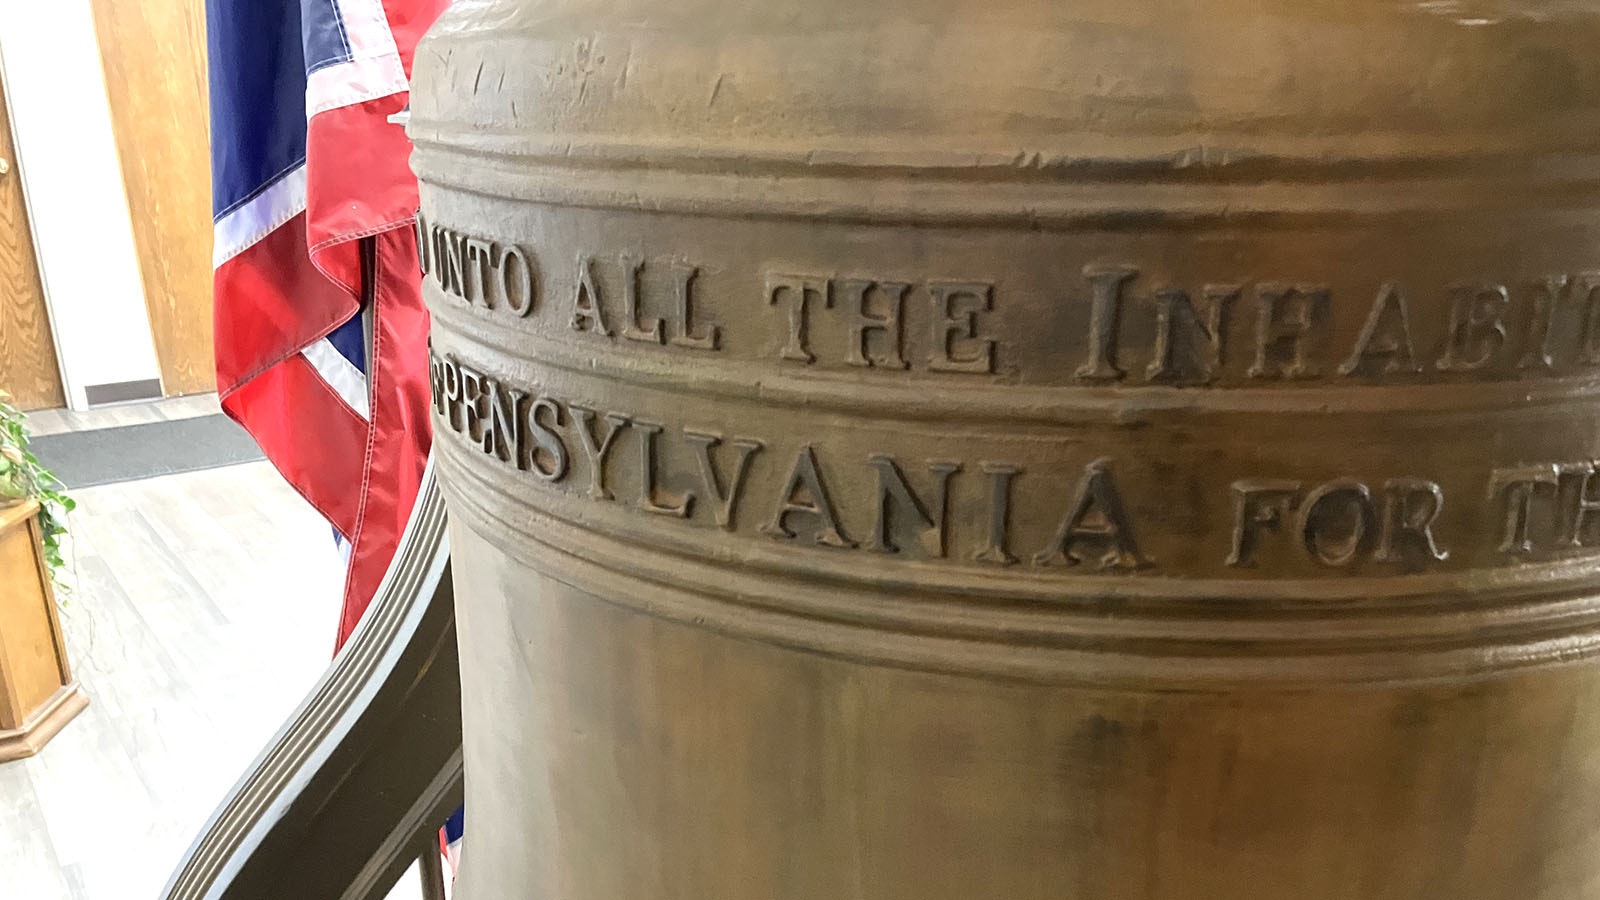 Just as on the original Liberty Bell, the state of Pennsylvania is spelled with just one “n” an acceptable spelling at the time of its creation.